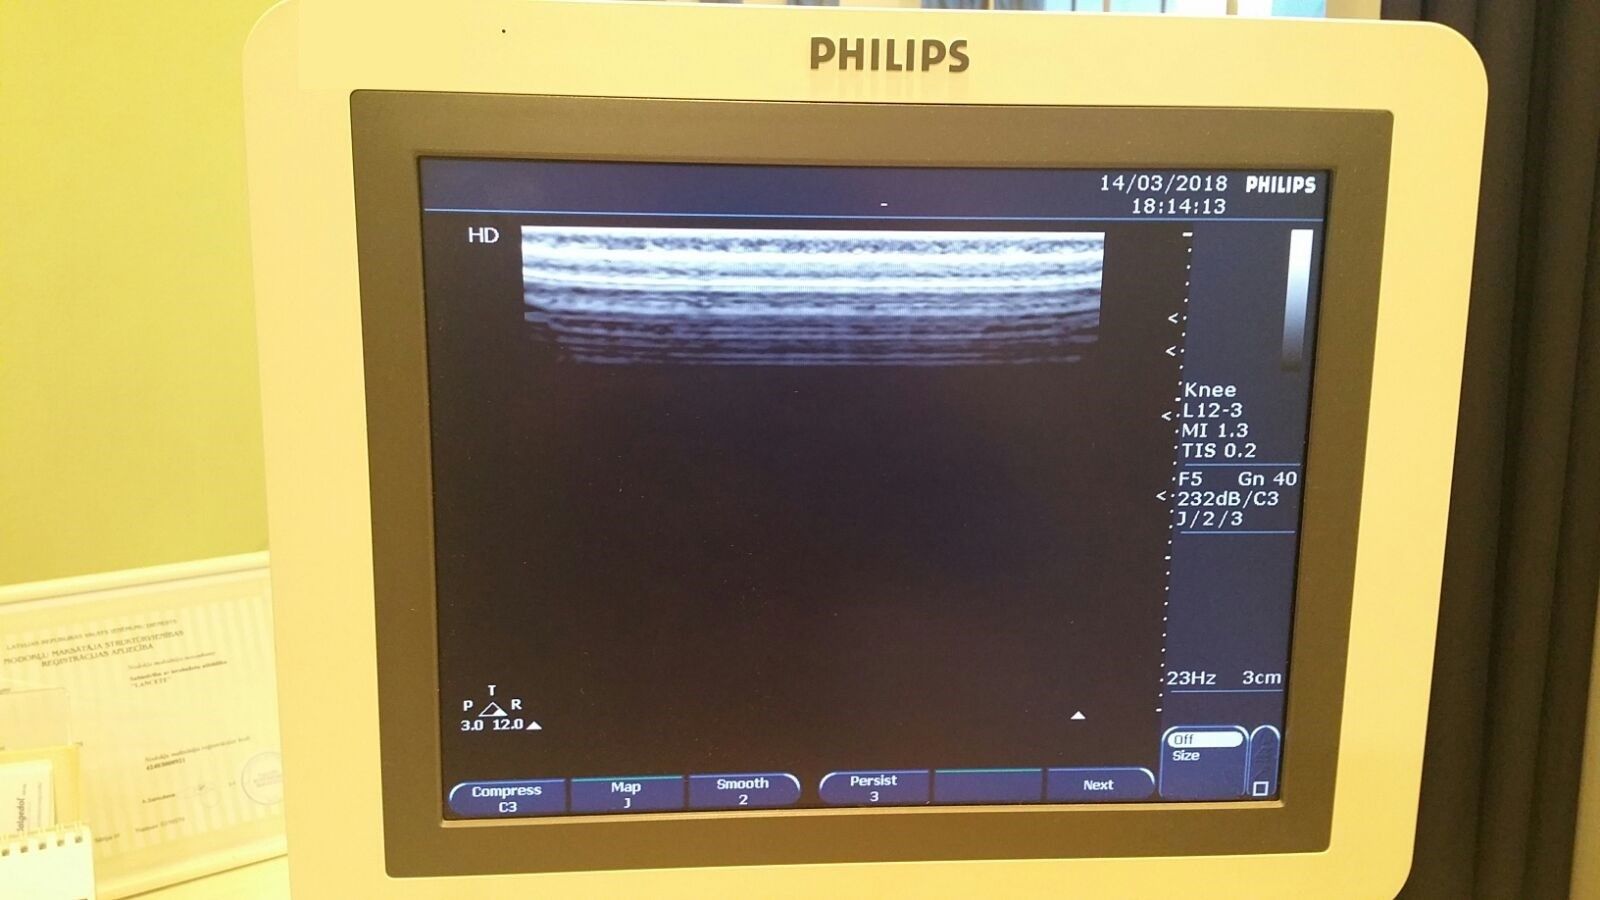 Philips HD7 Revision 1.1 Diagnostic Ultrasound System DIAGNOSTIC ULTRASOUND MACHINES FOR SALE